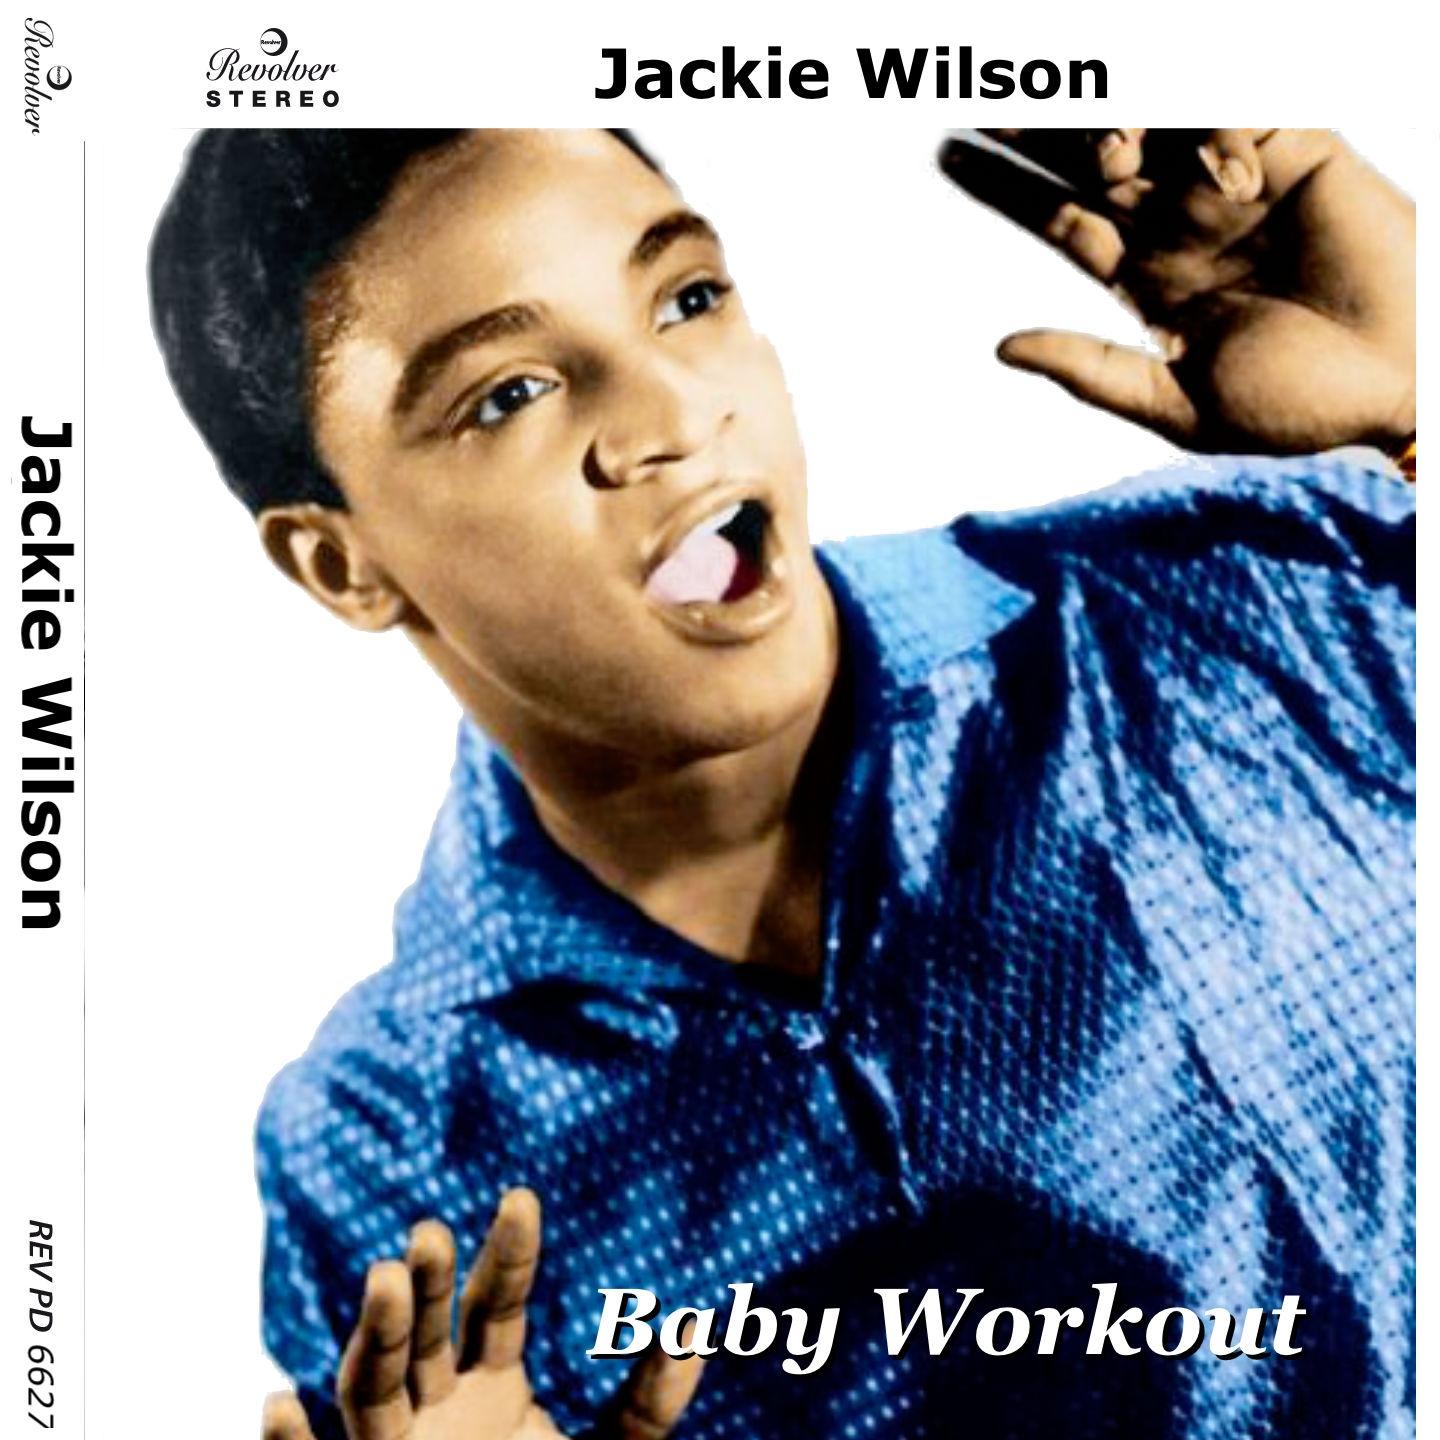 Baby Workout Limited Edition Single